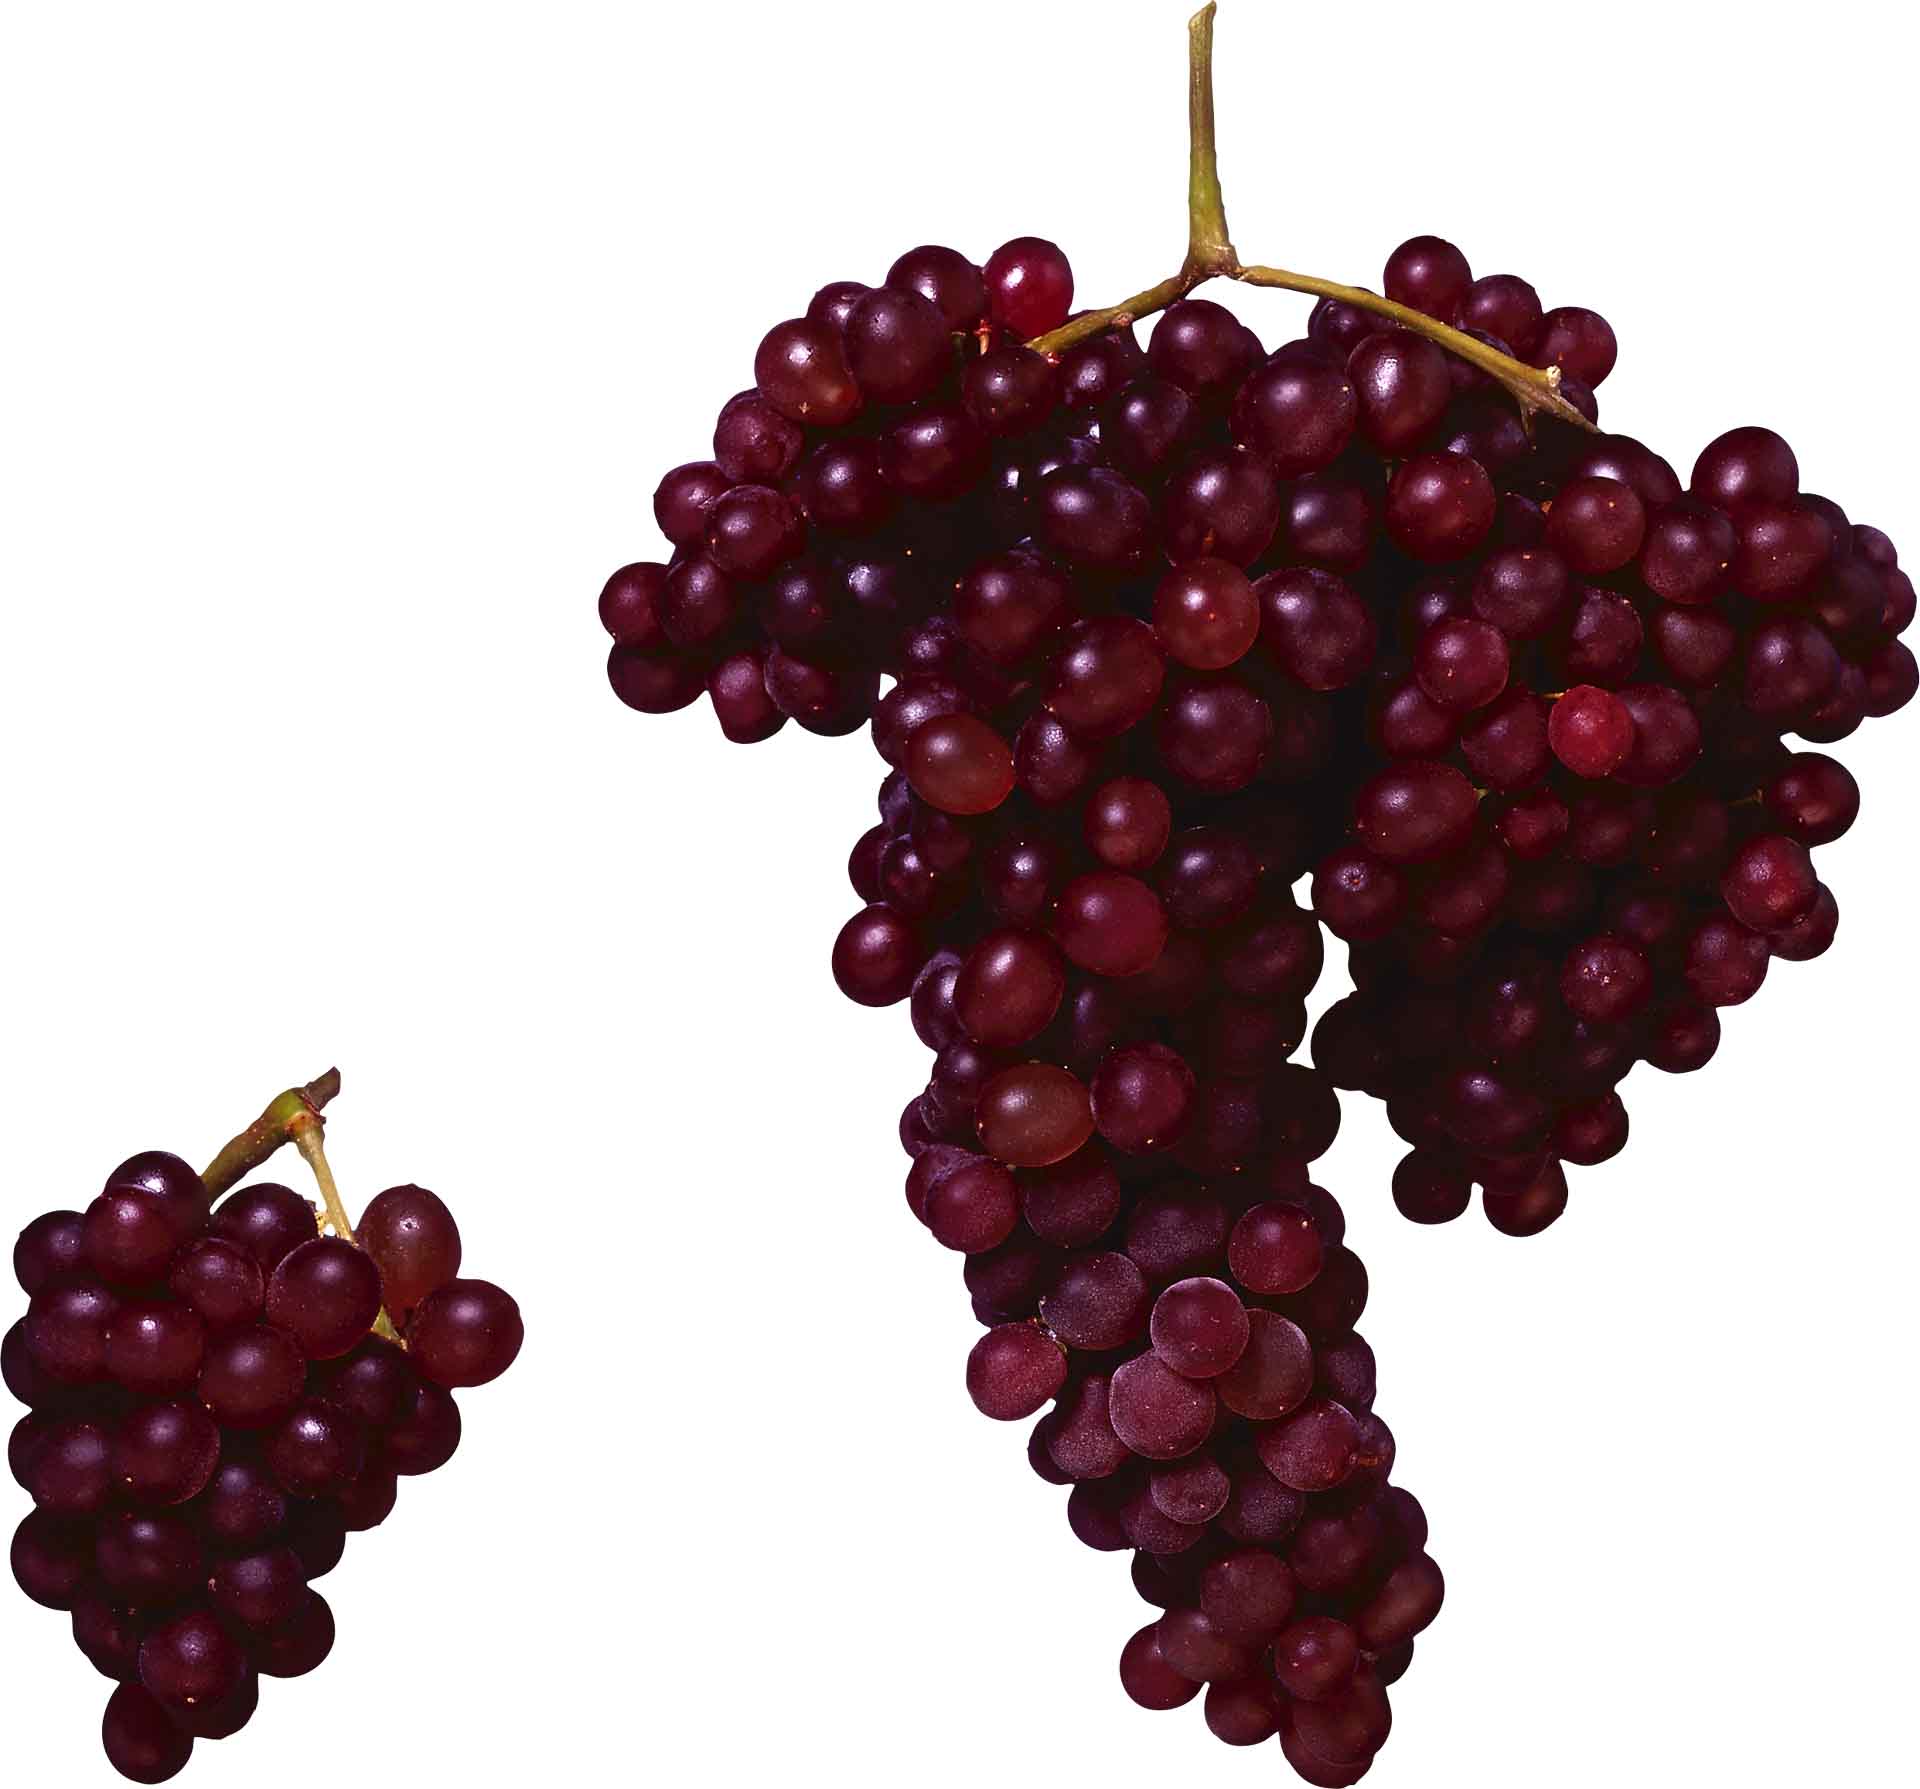 Red Grapes HD Wallpaper New